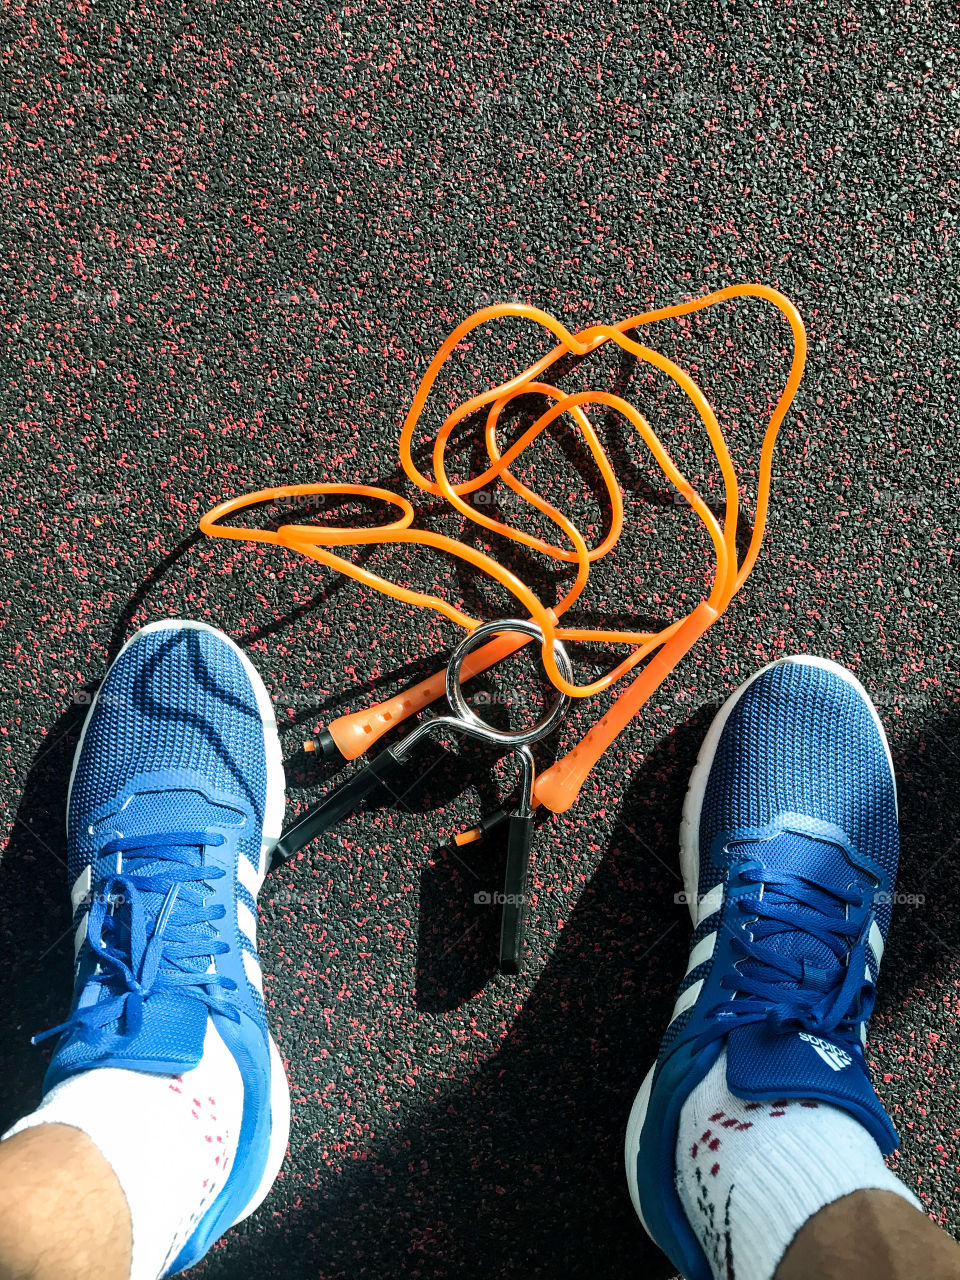 Gym equipment and morning workout 